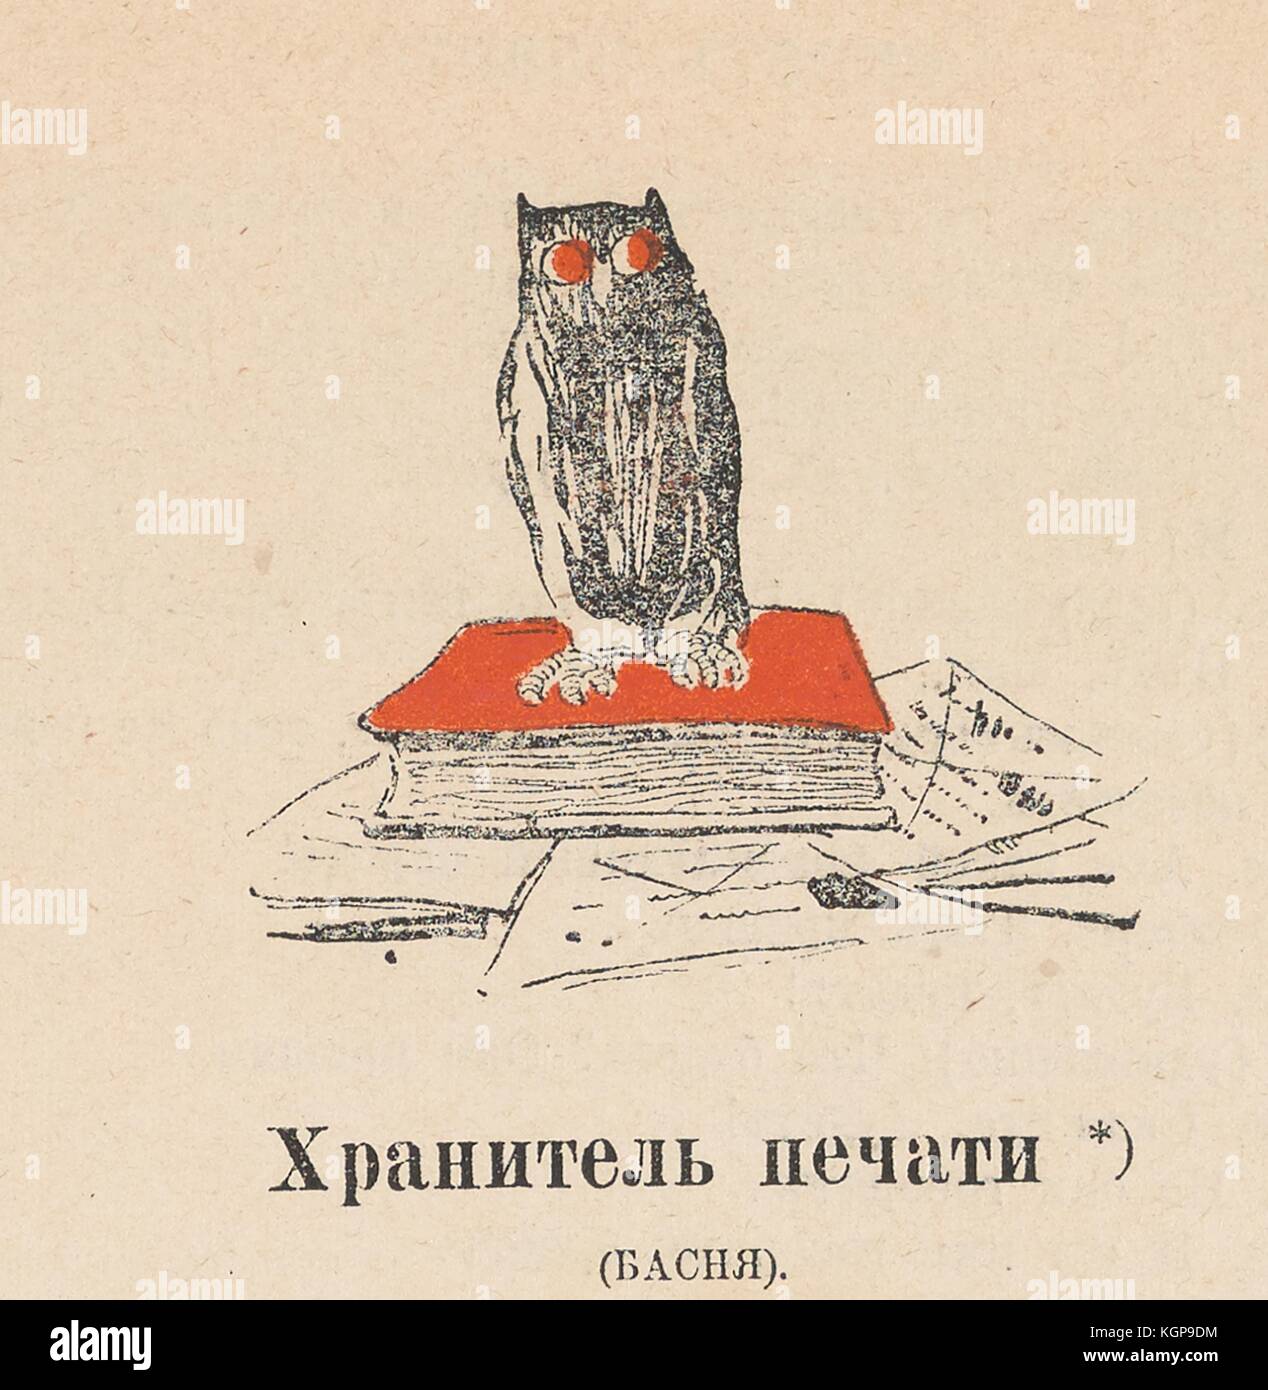 Illustration accompanying a poem titled 'Keeper of the print' from the Russian satirical journal Plamia (Flame) depicting an owl sitting on top of a book and other papers, 1905. () Stock Photo